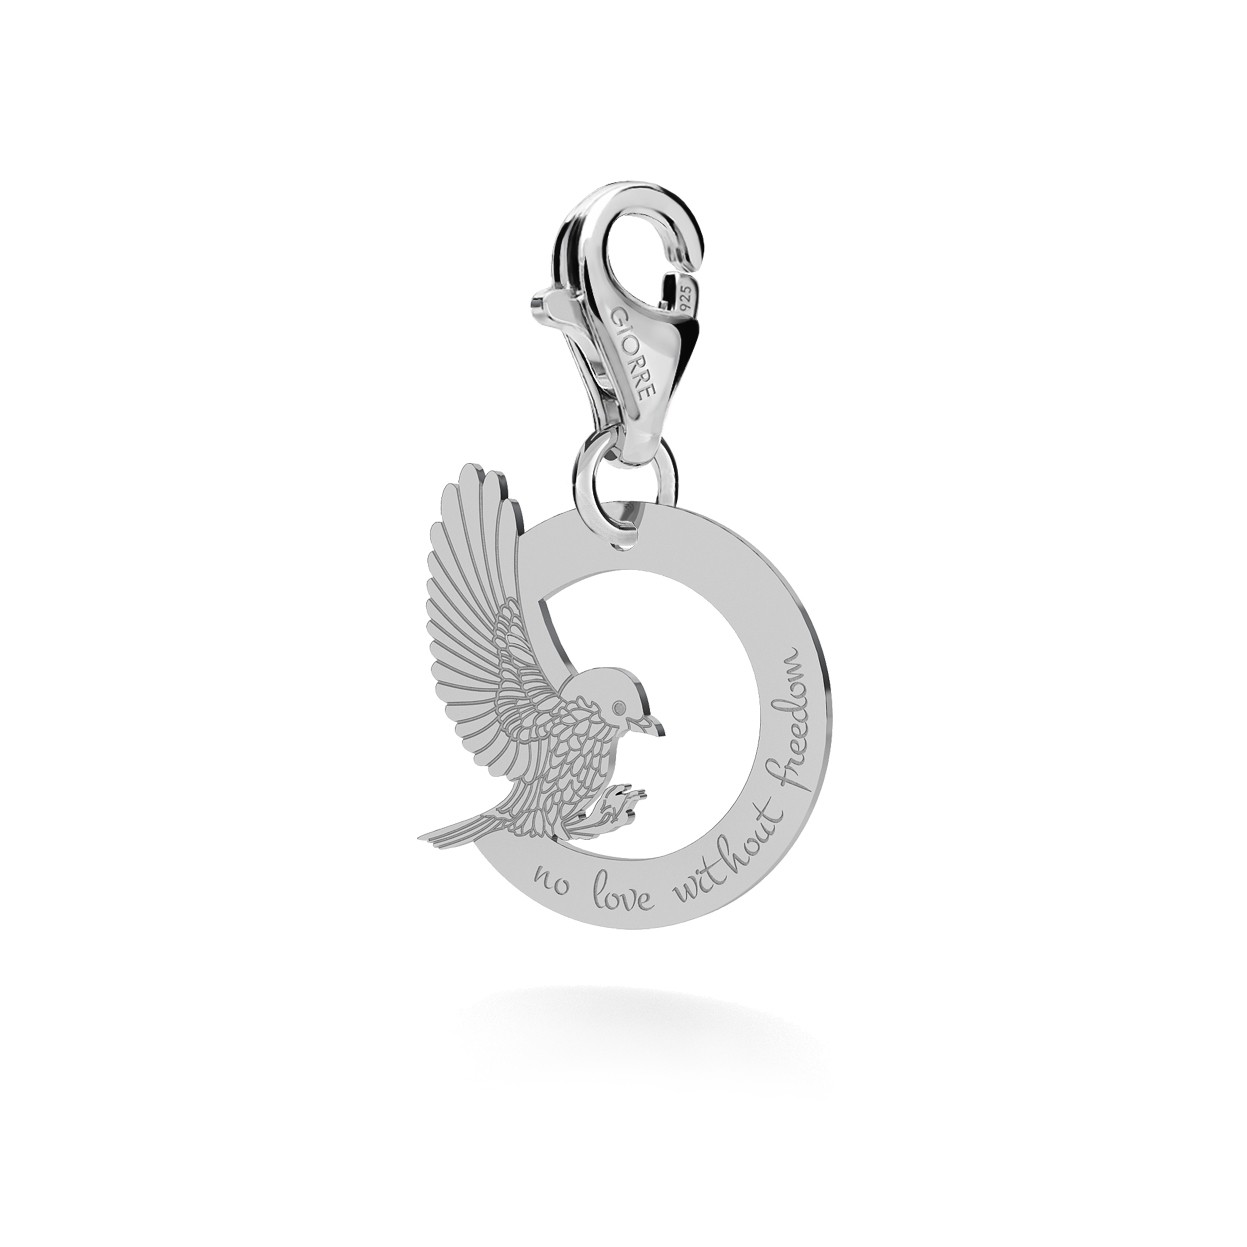 CHARM 95, PENDANT FREE AS A BIRD WITH ENGRAVE, SILVER 925, RHODIUM OR GOLD PLATED